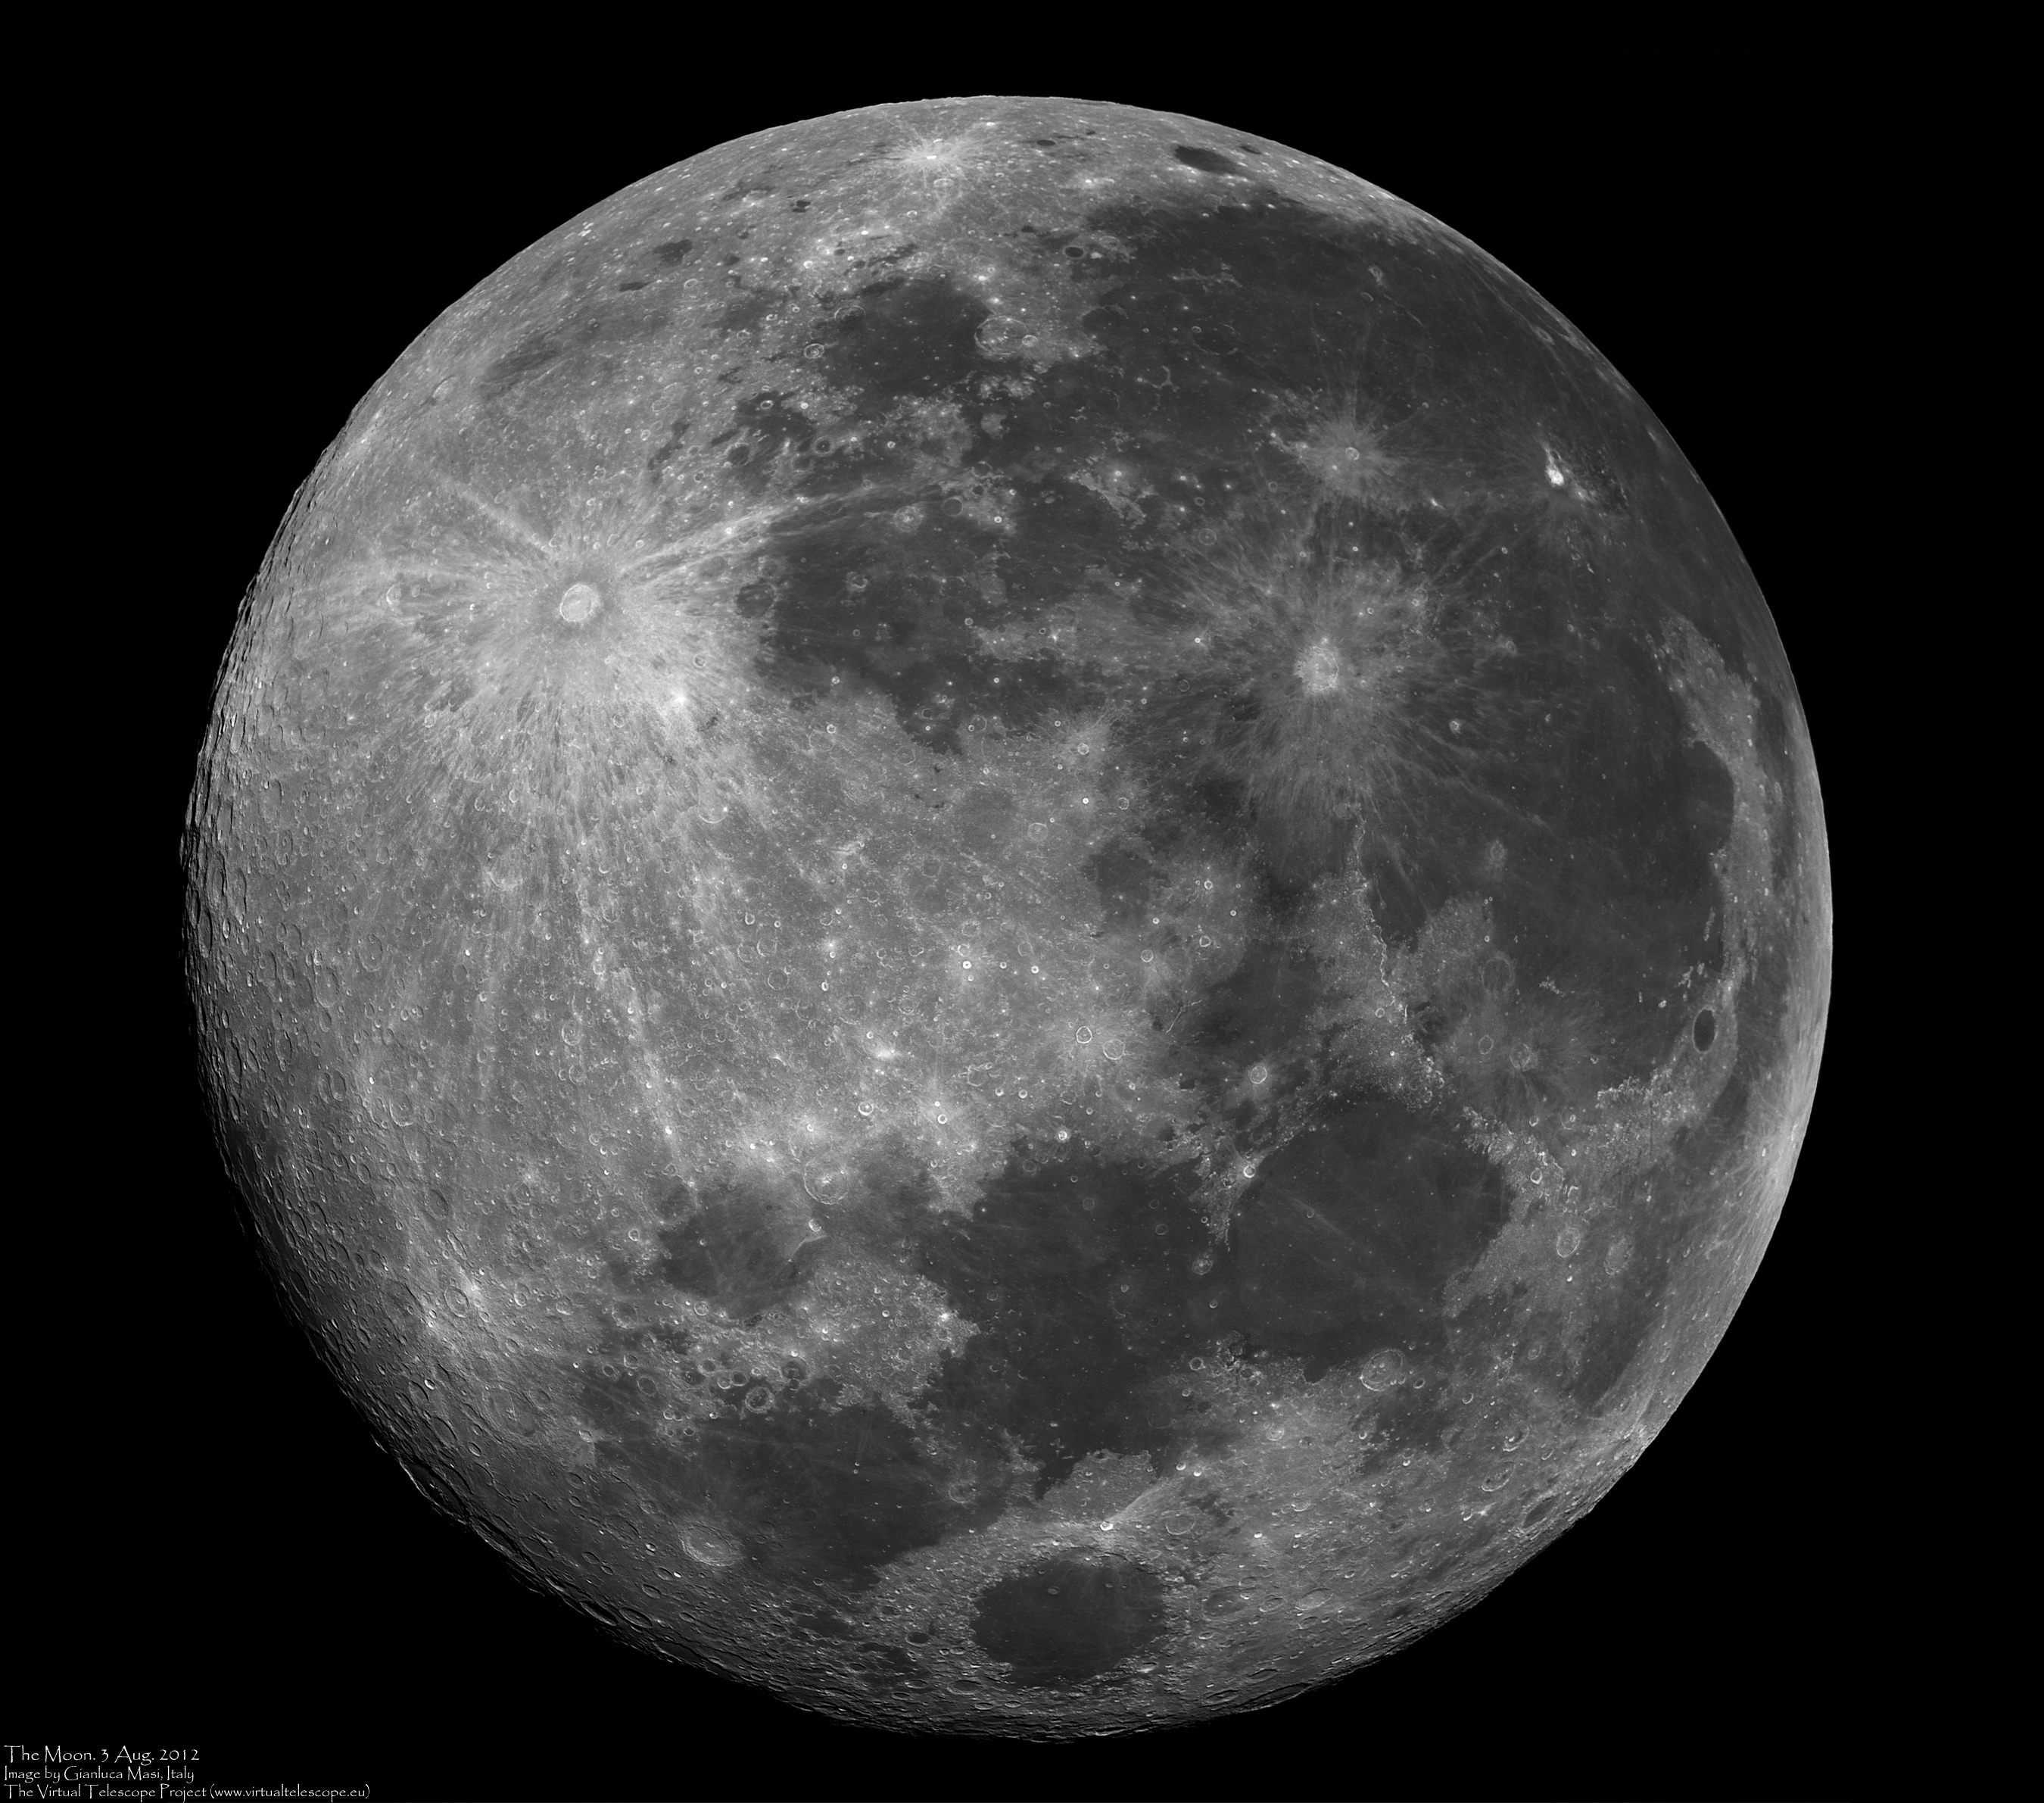 The Full Moon The Virtual Telescope Project 2.0